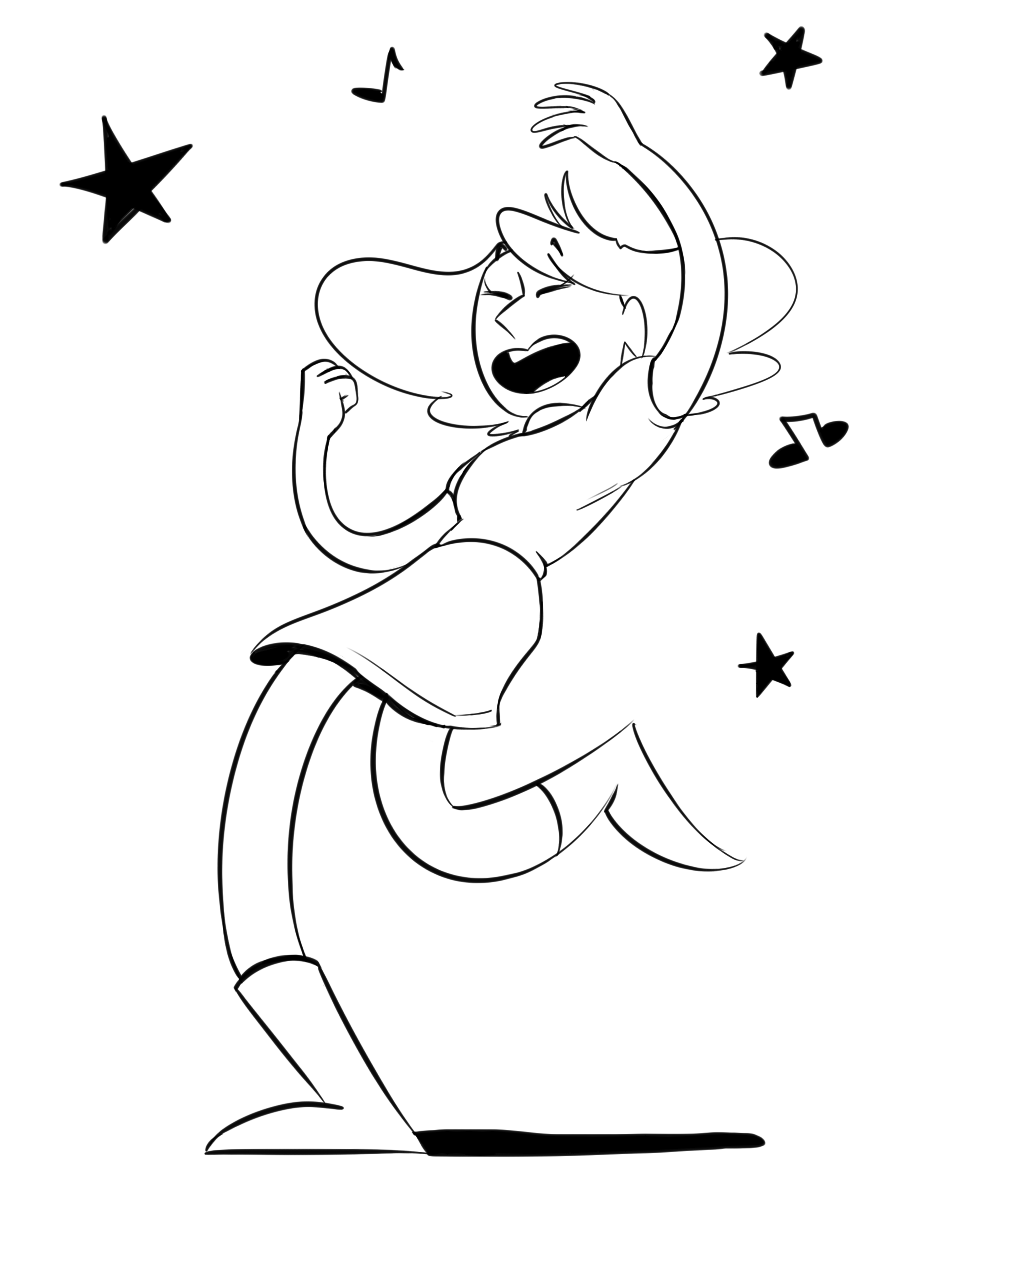 Black and White commission of Connie dancing for @thesimplekritik